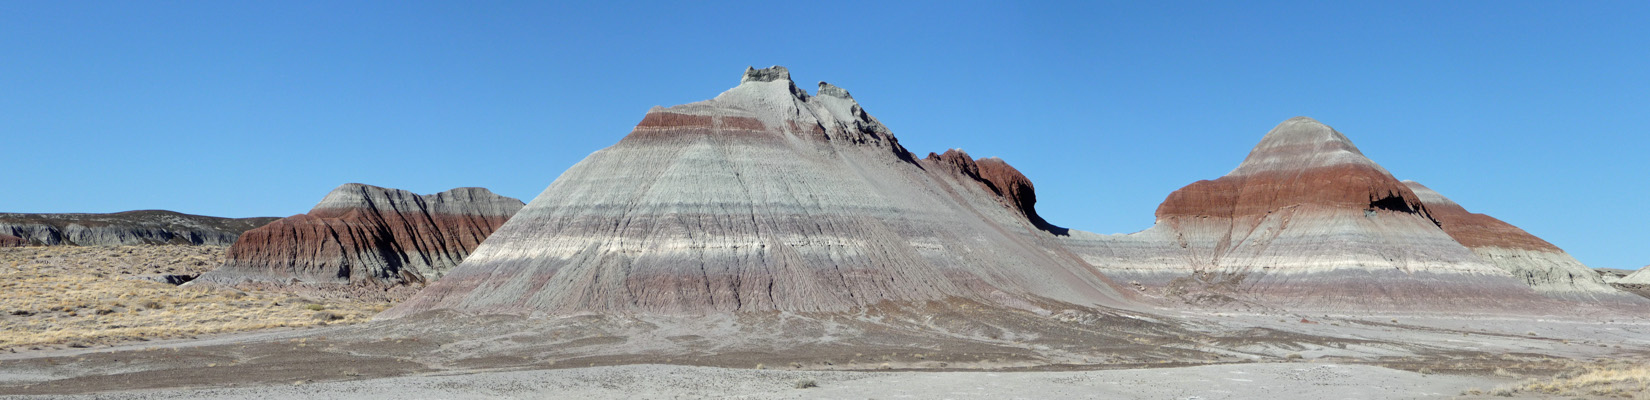 The Teepees Petrified Forest NP